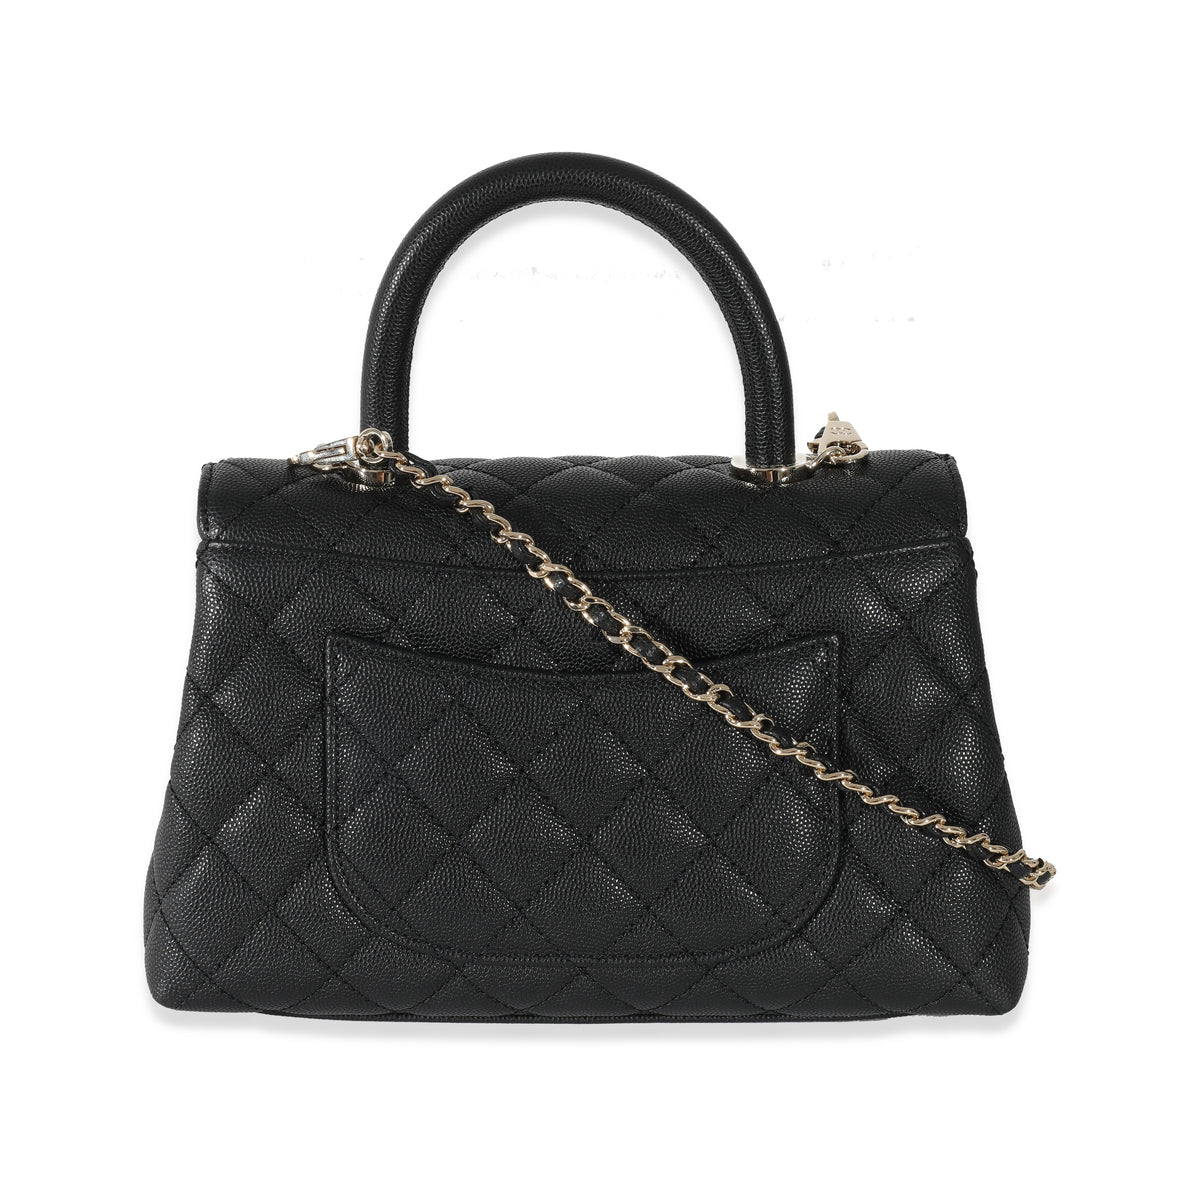 Chanel Black Caviar Quilted Small Coco Top Handle Flap Bag